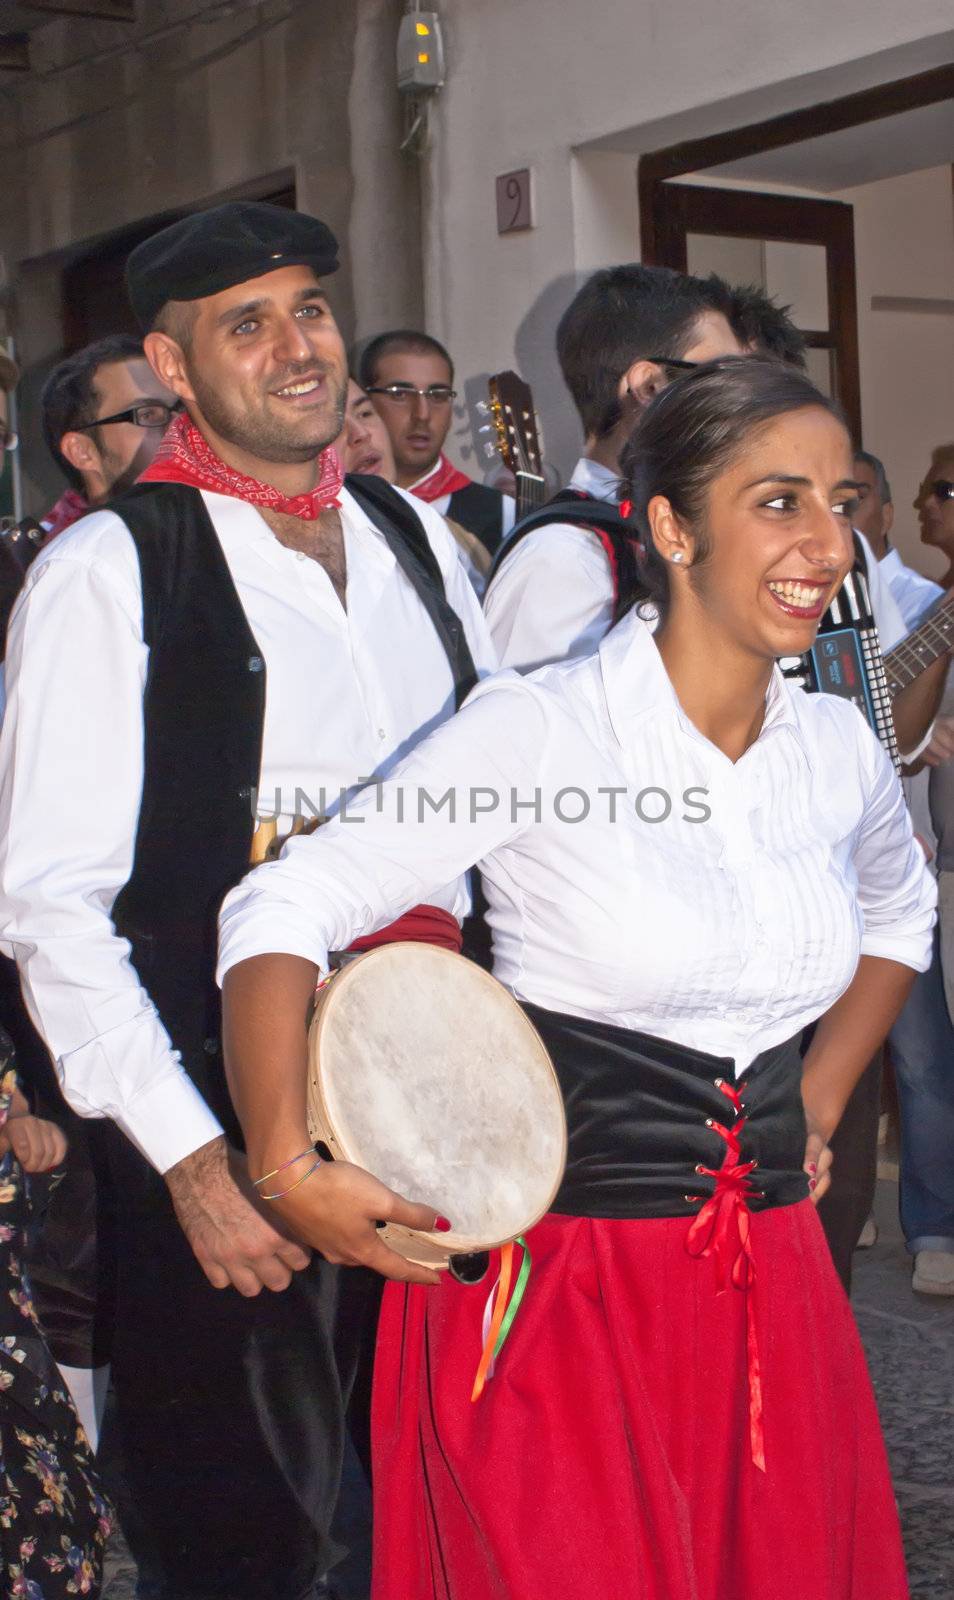 POLIZZI GENEROSA, SICILY - AUGUST 21: Sicilian folk group from Polizzi G. at the International "Festival of hazelnuts",dance and parade through the city: August 21, 2011 in Polizzi Generosa,Sicily, Italy